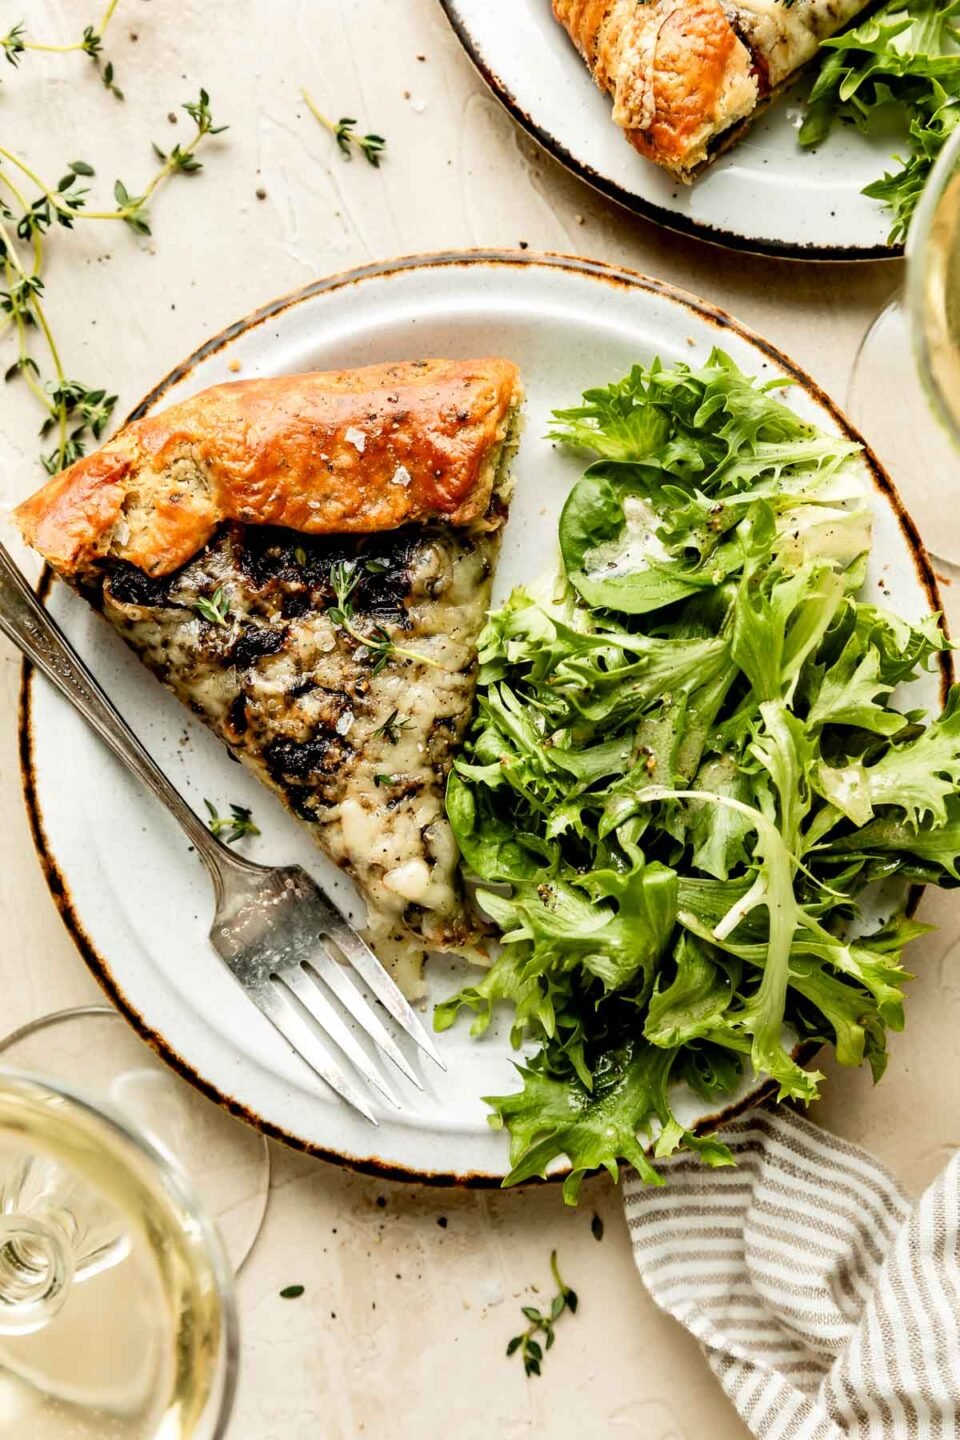 An overhead shot of a slice of a caramelized onion galette alongside mixed greens on a white plate atop an off-white surface. Two glasses of white wine sit alongside the plate.